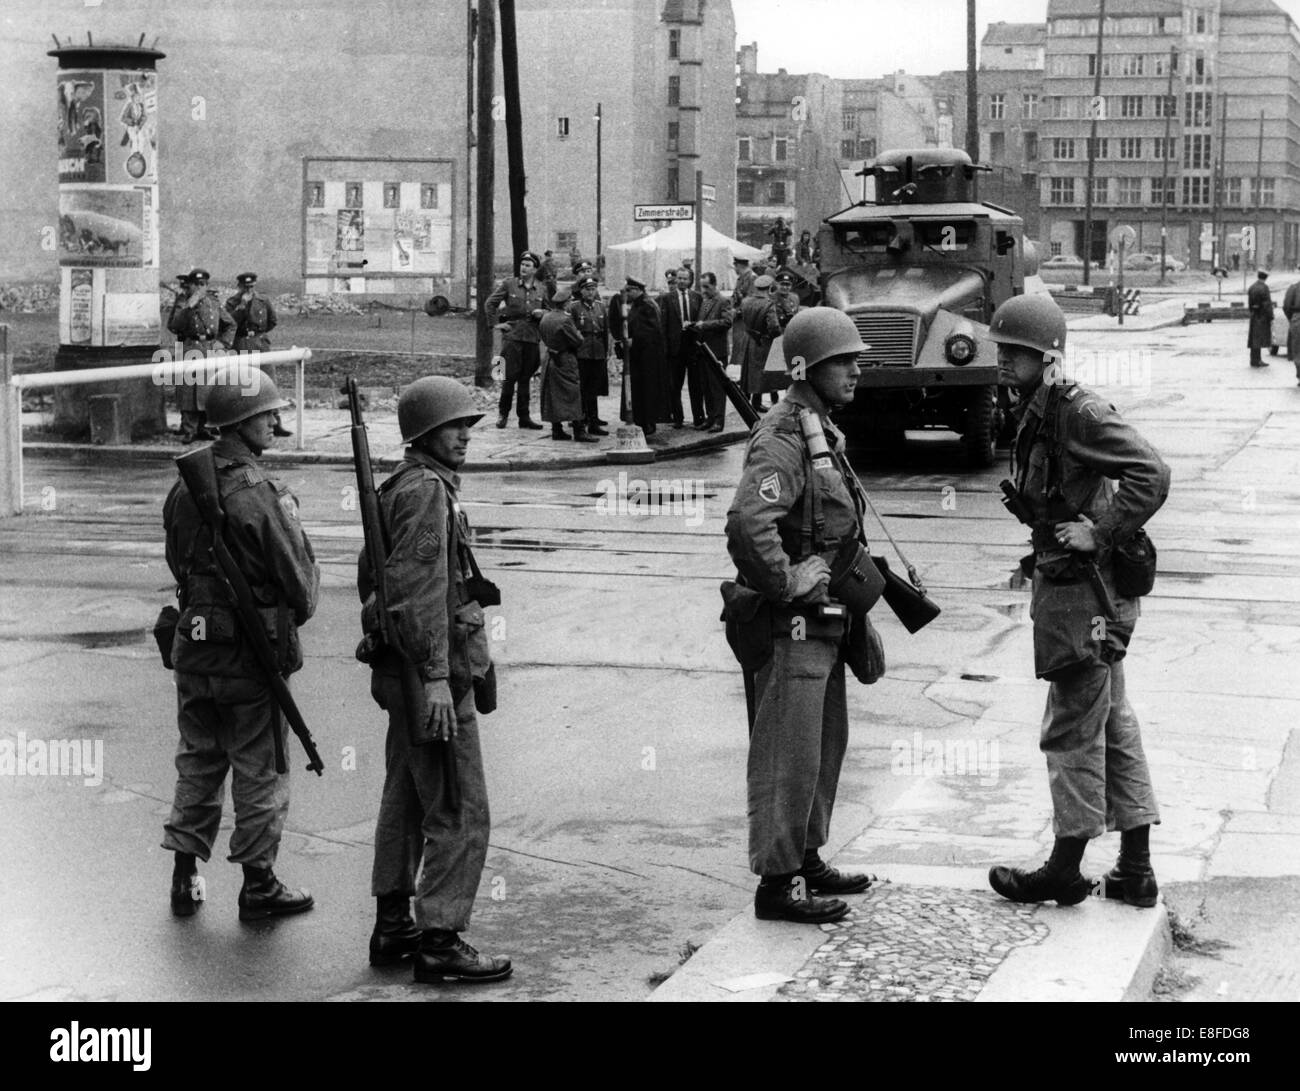 Soldiers of the US Army standing on the western side of Berlin and People's Police officers of the GDR, with water guns, standing on the eastern side of Berlin on 24th August 1961 at checkpoint Friedrichstraße in Berlin. From the 13th August 1961, the day of the construction of the Wall, until the fall of the Wall on the 9th November 1989, the Federal Republic of Germany and the GDR were seperated into West and East by an 'Iron Curtain'. Stock Photo